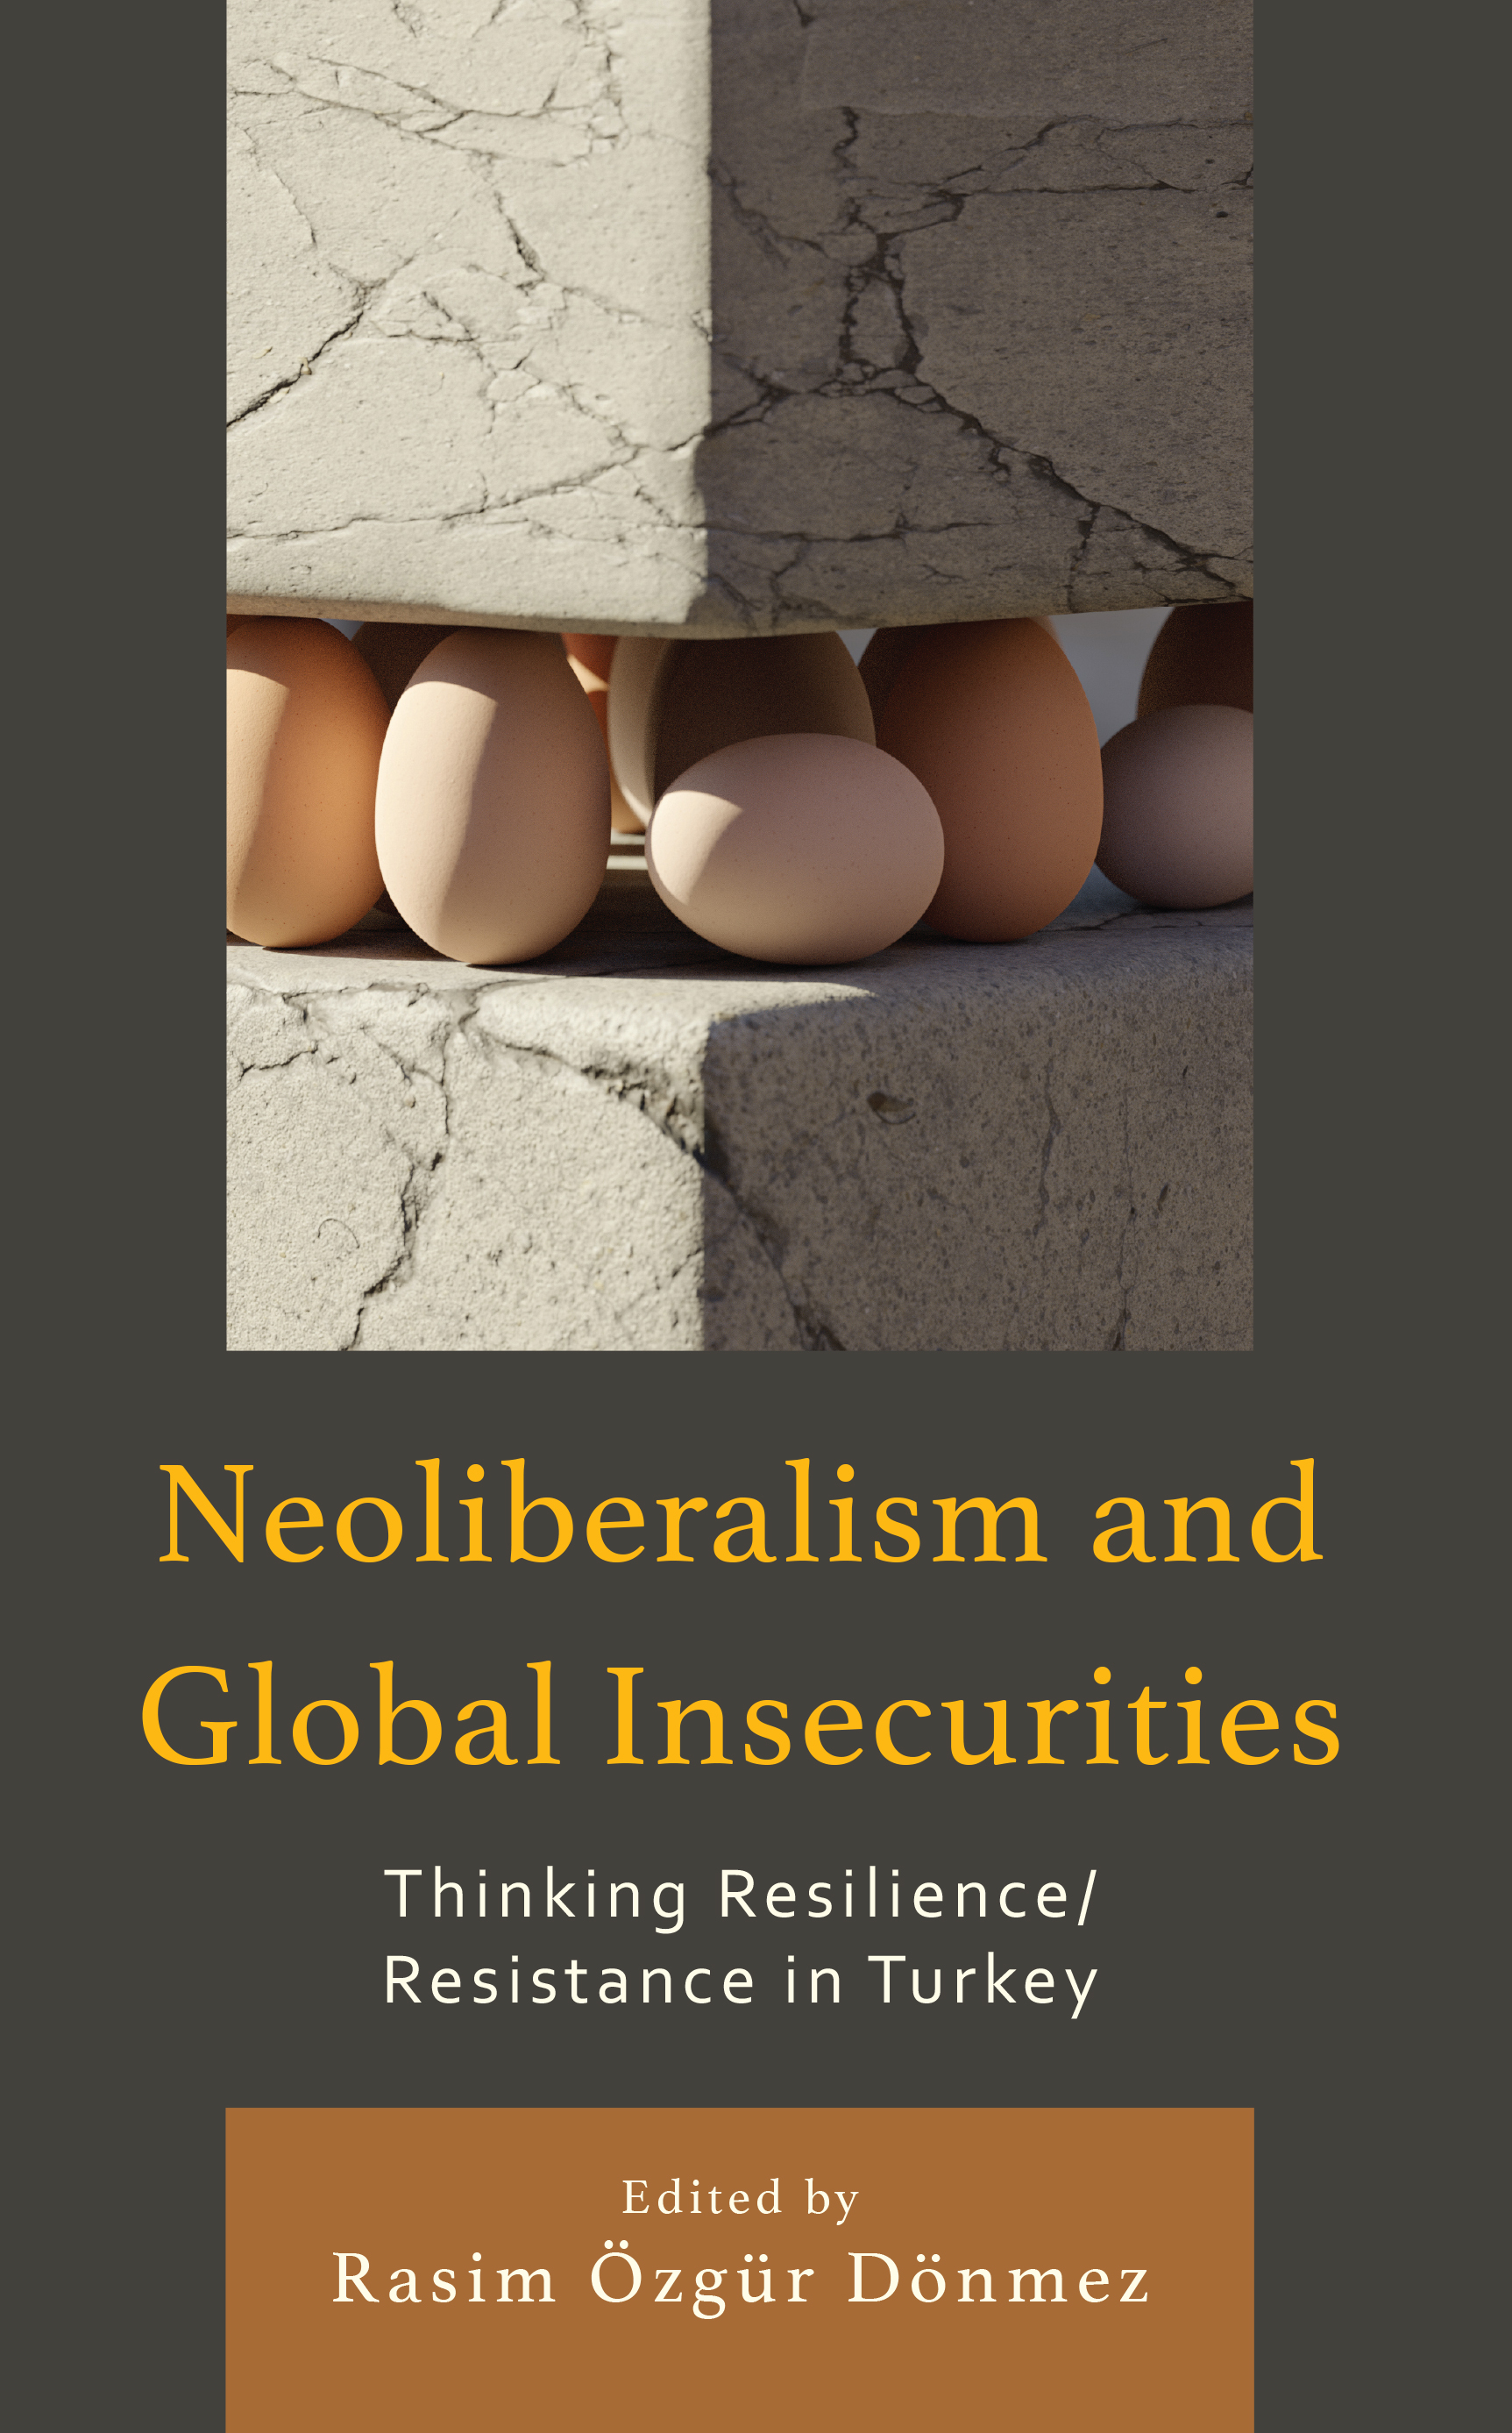 Neoliberalism and Global Insecurities: Thinking Resilience/Resistance in Turkey